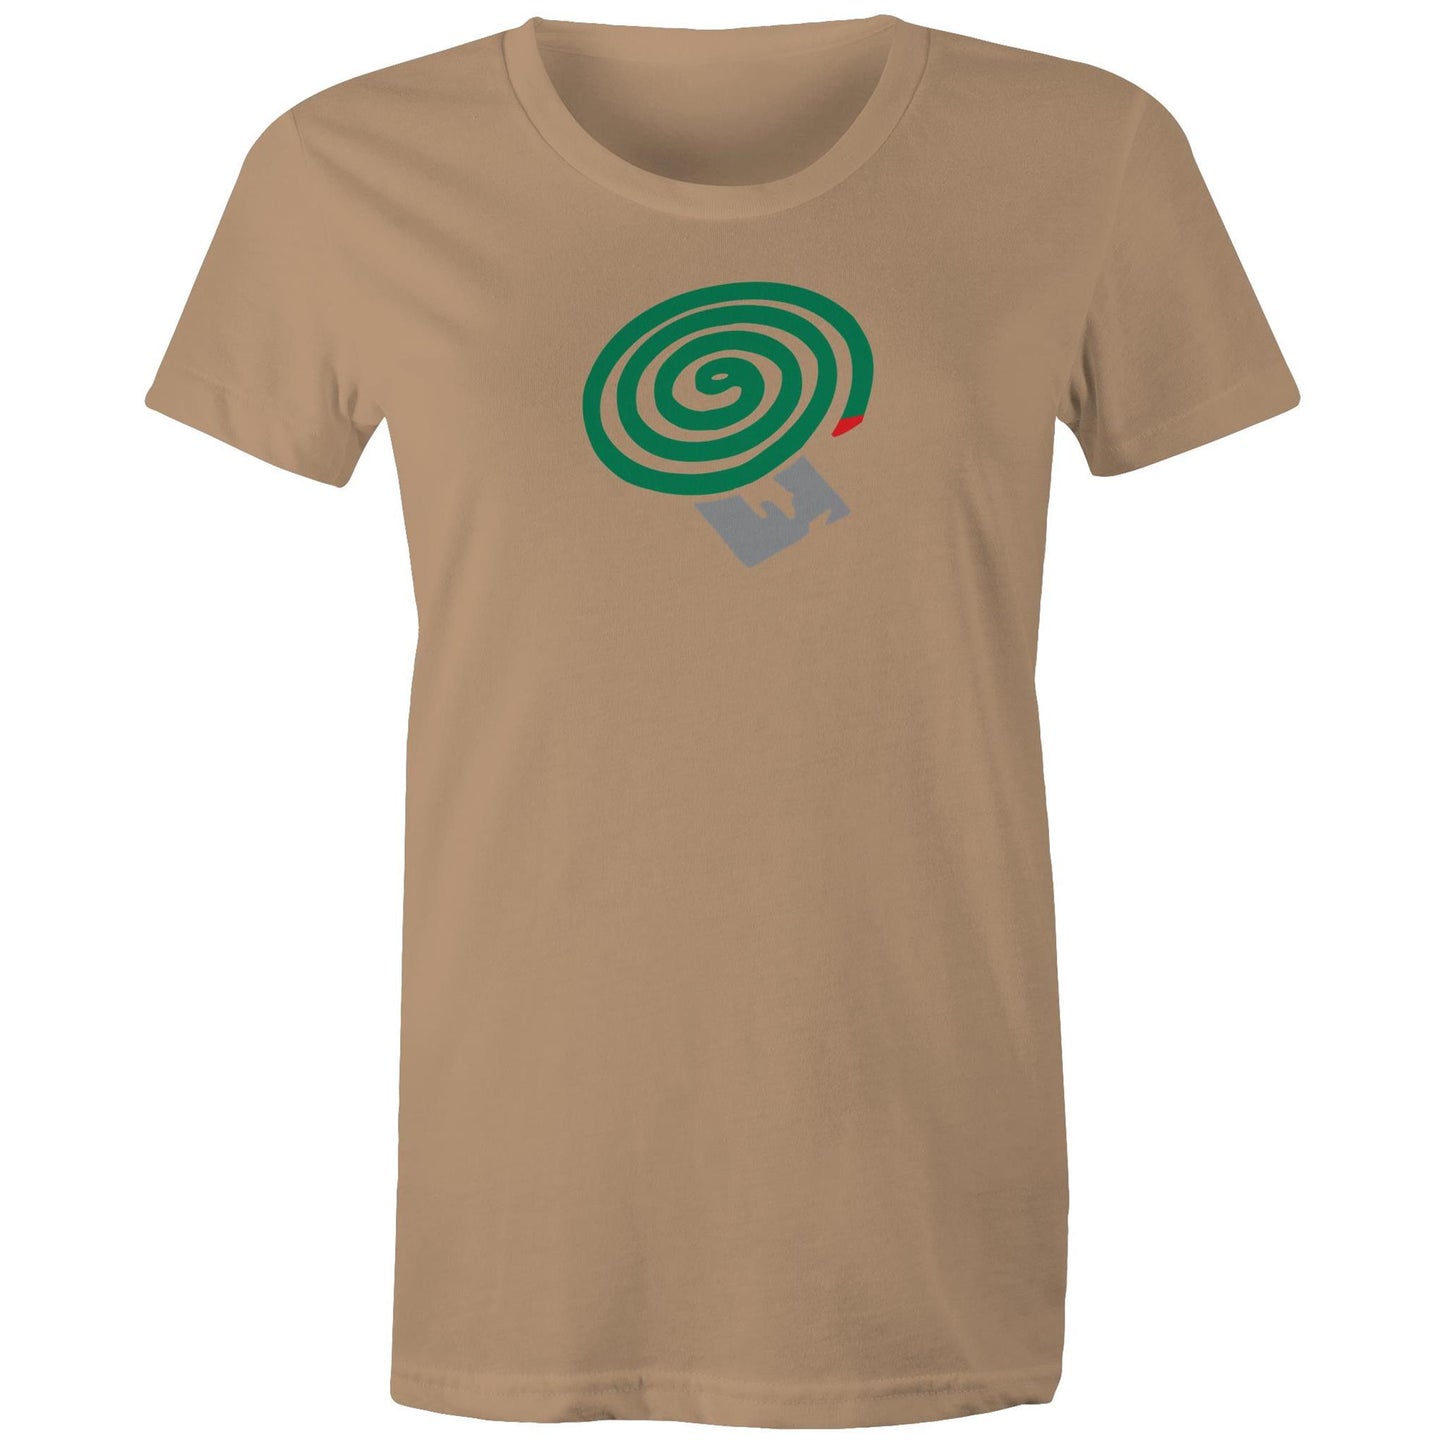 Mosquito Coil T Shirts for Women